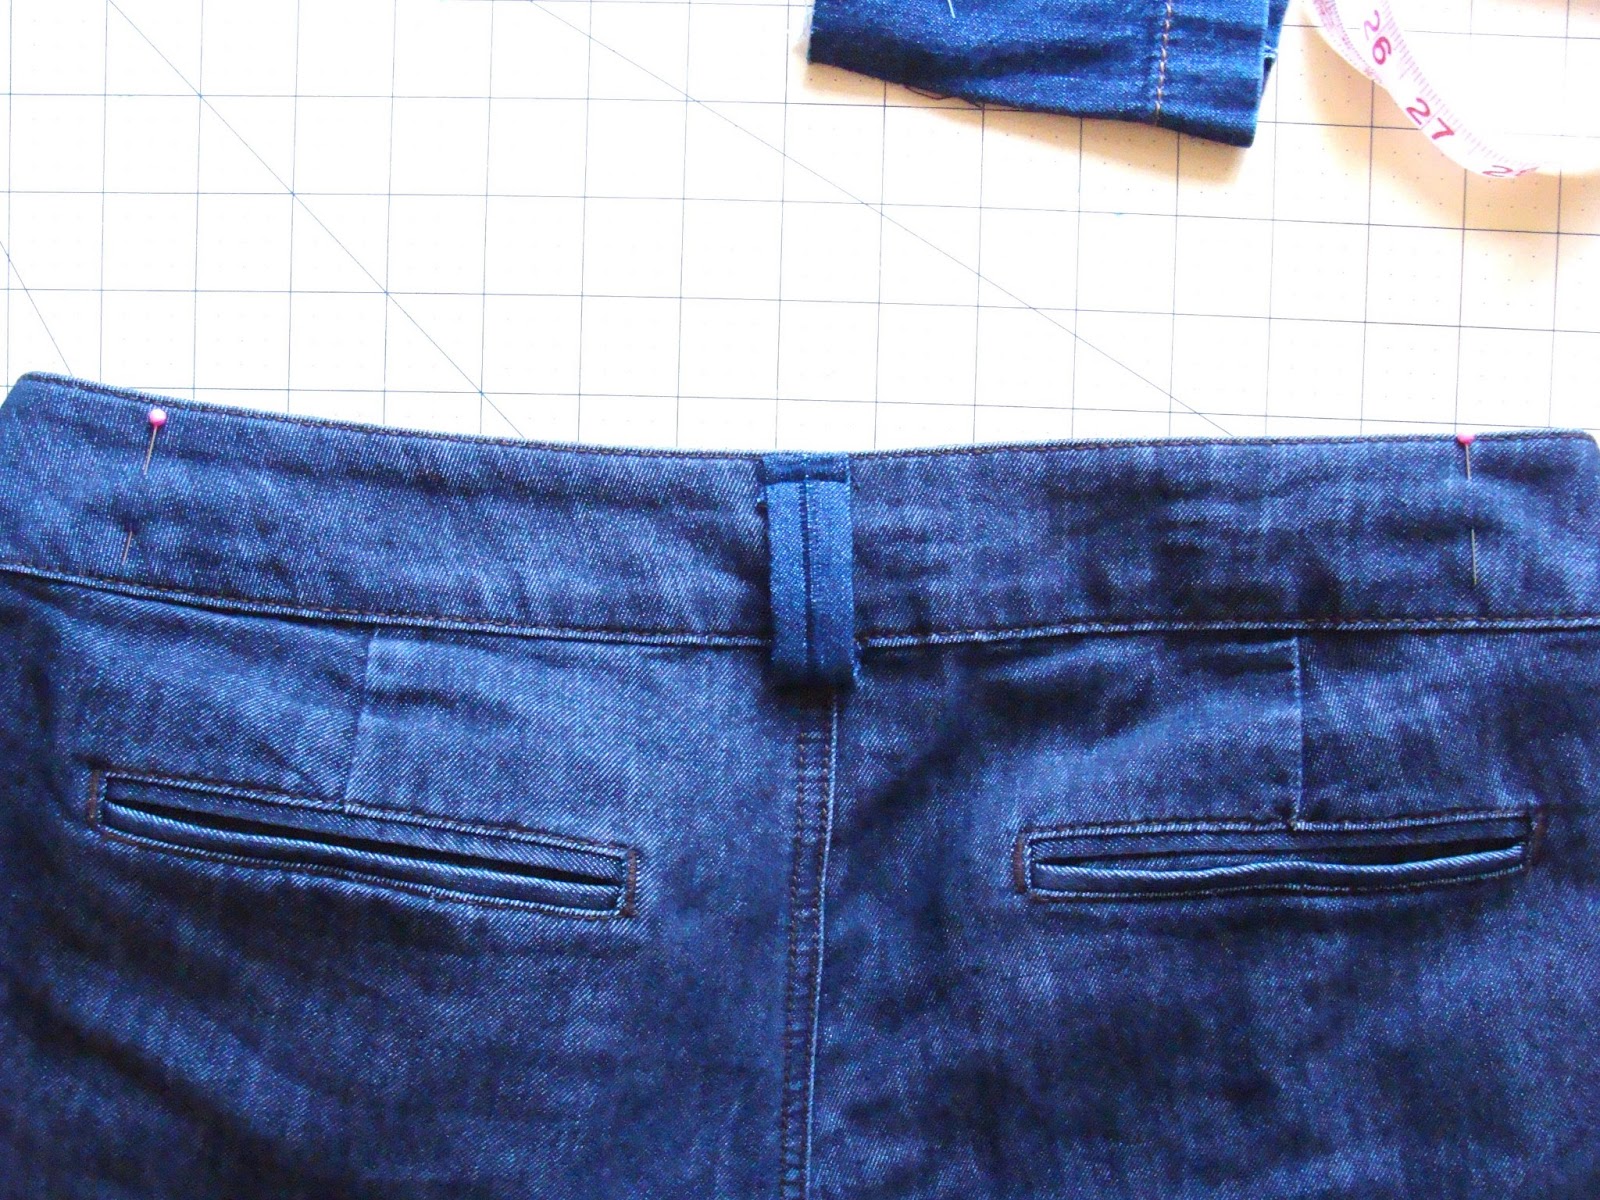 Sewing Jeans Belt Loops the Easy Way - The Last Stitch